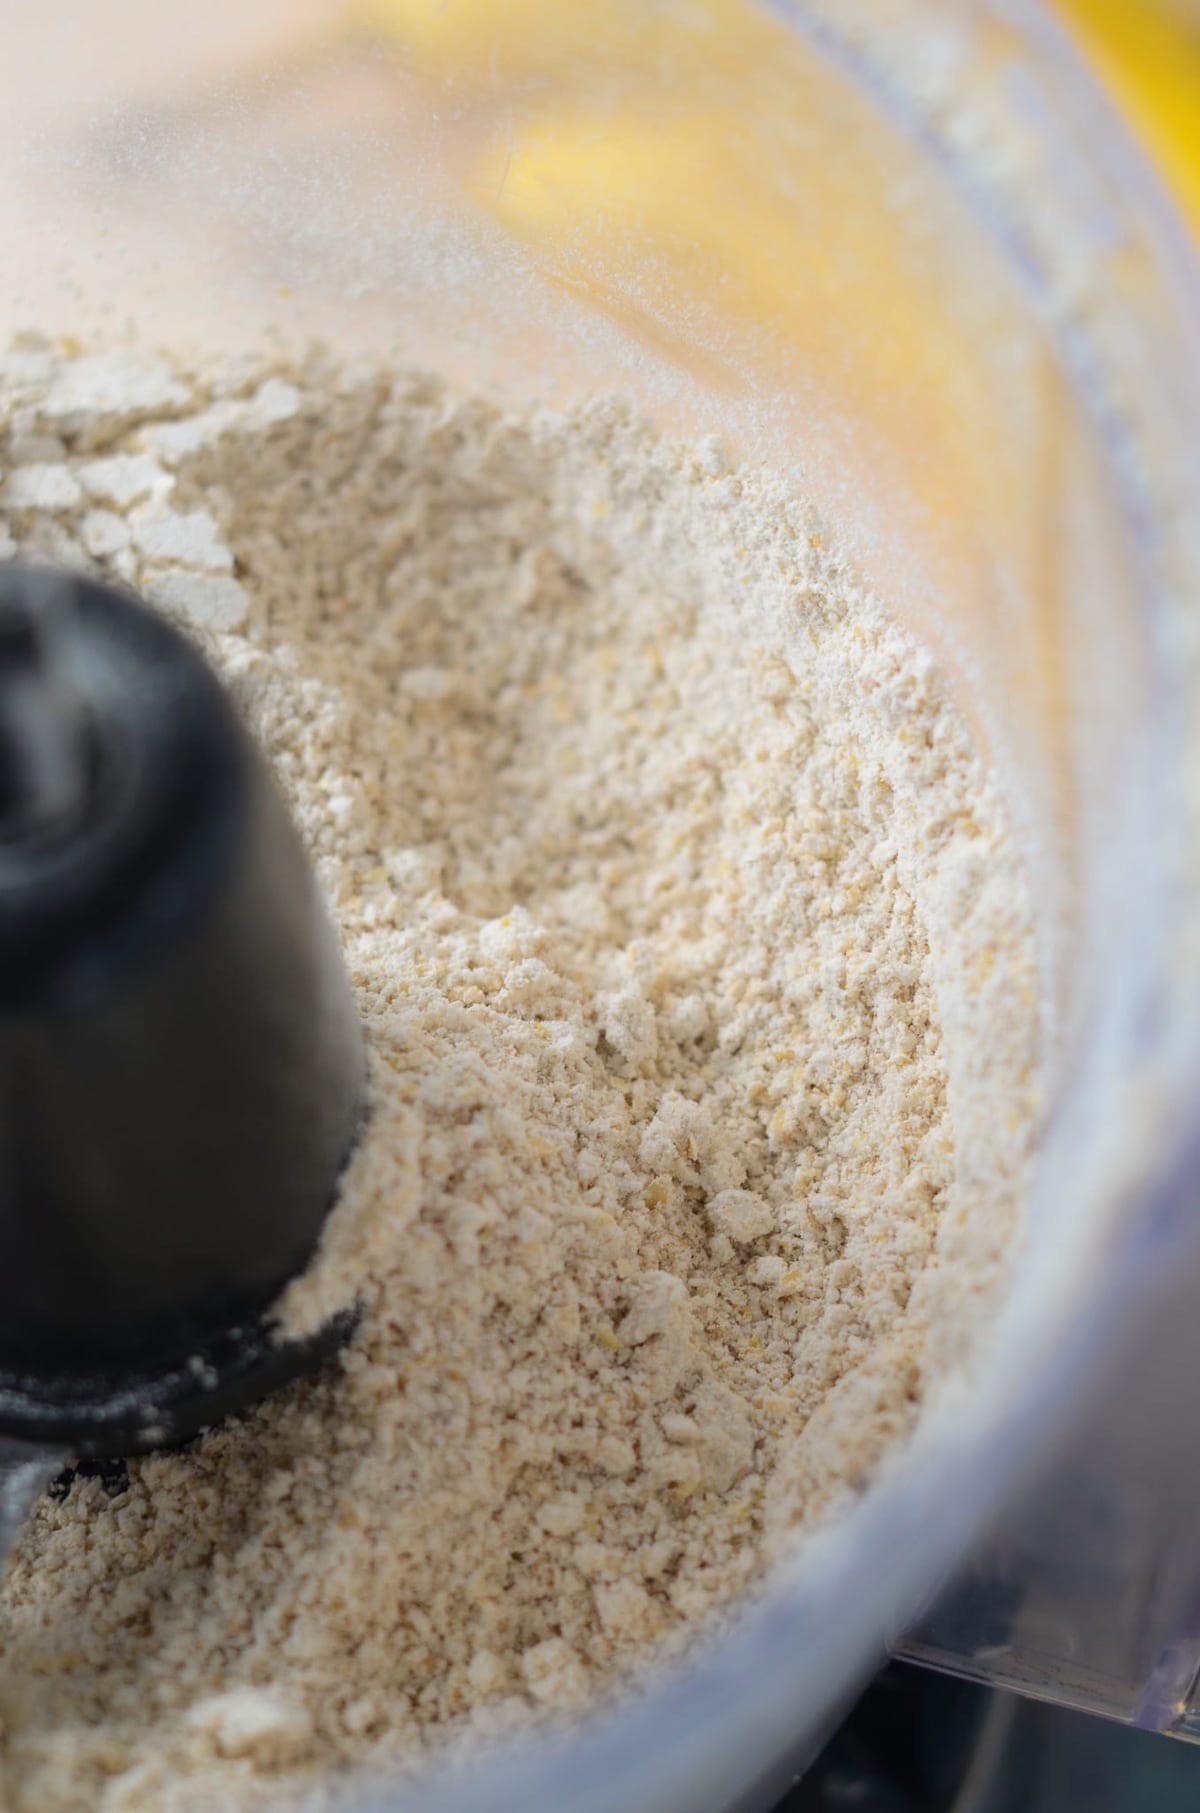 This is a photo of oat flour in a food processor.